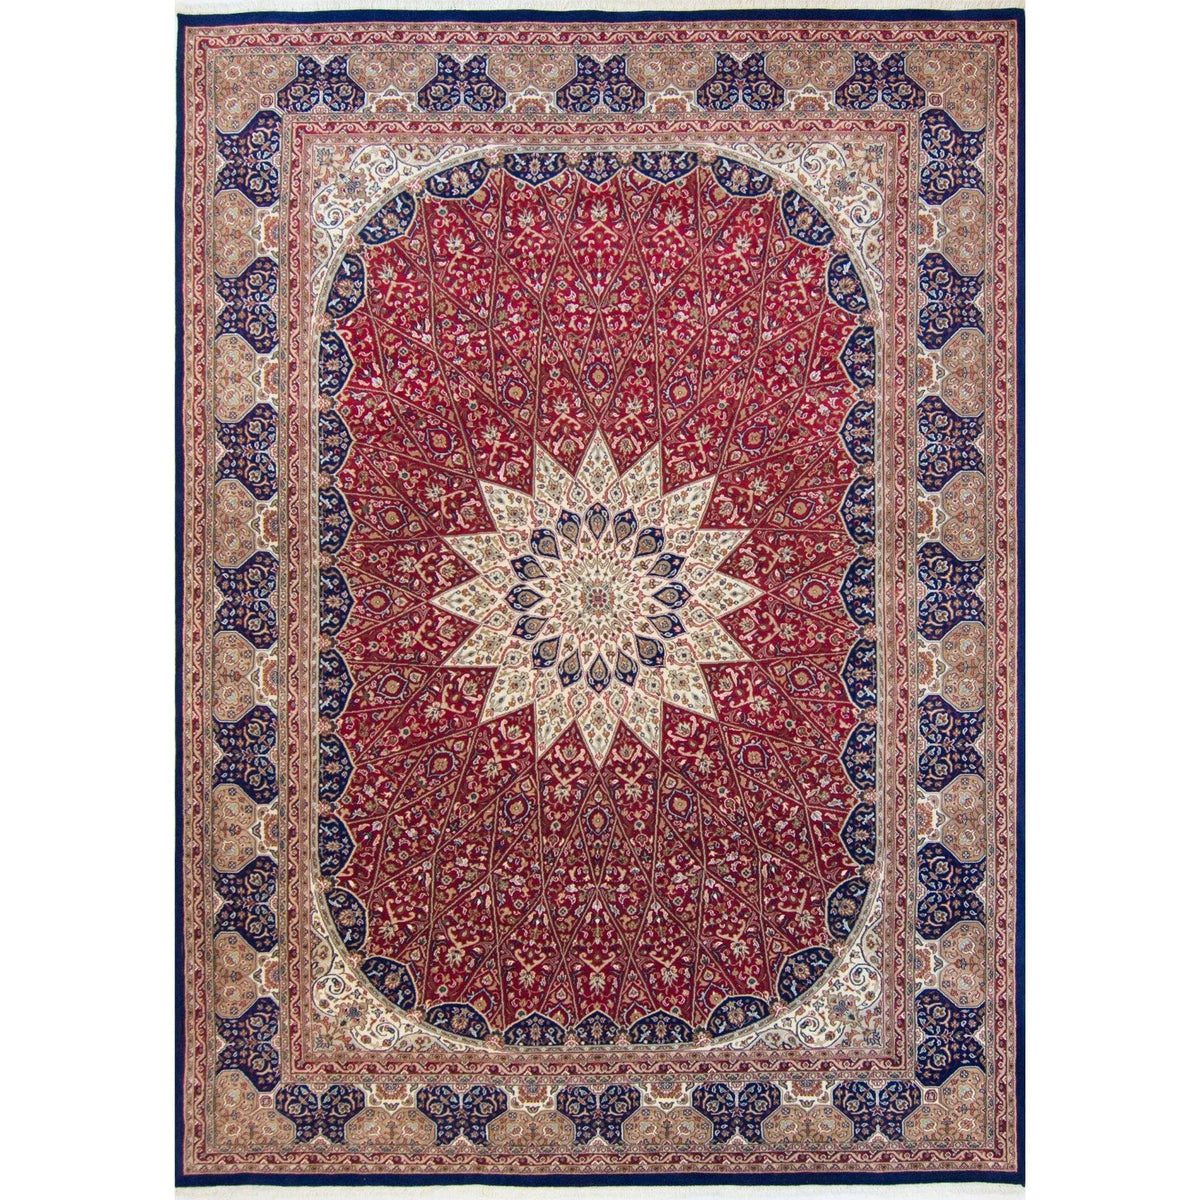 Fine Hand-knotted Persian Wool and Silk Tabriz Rug 251cm x 361cm